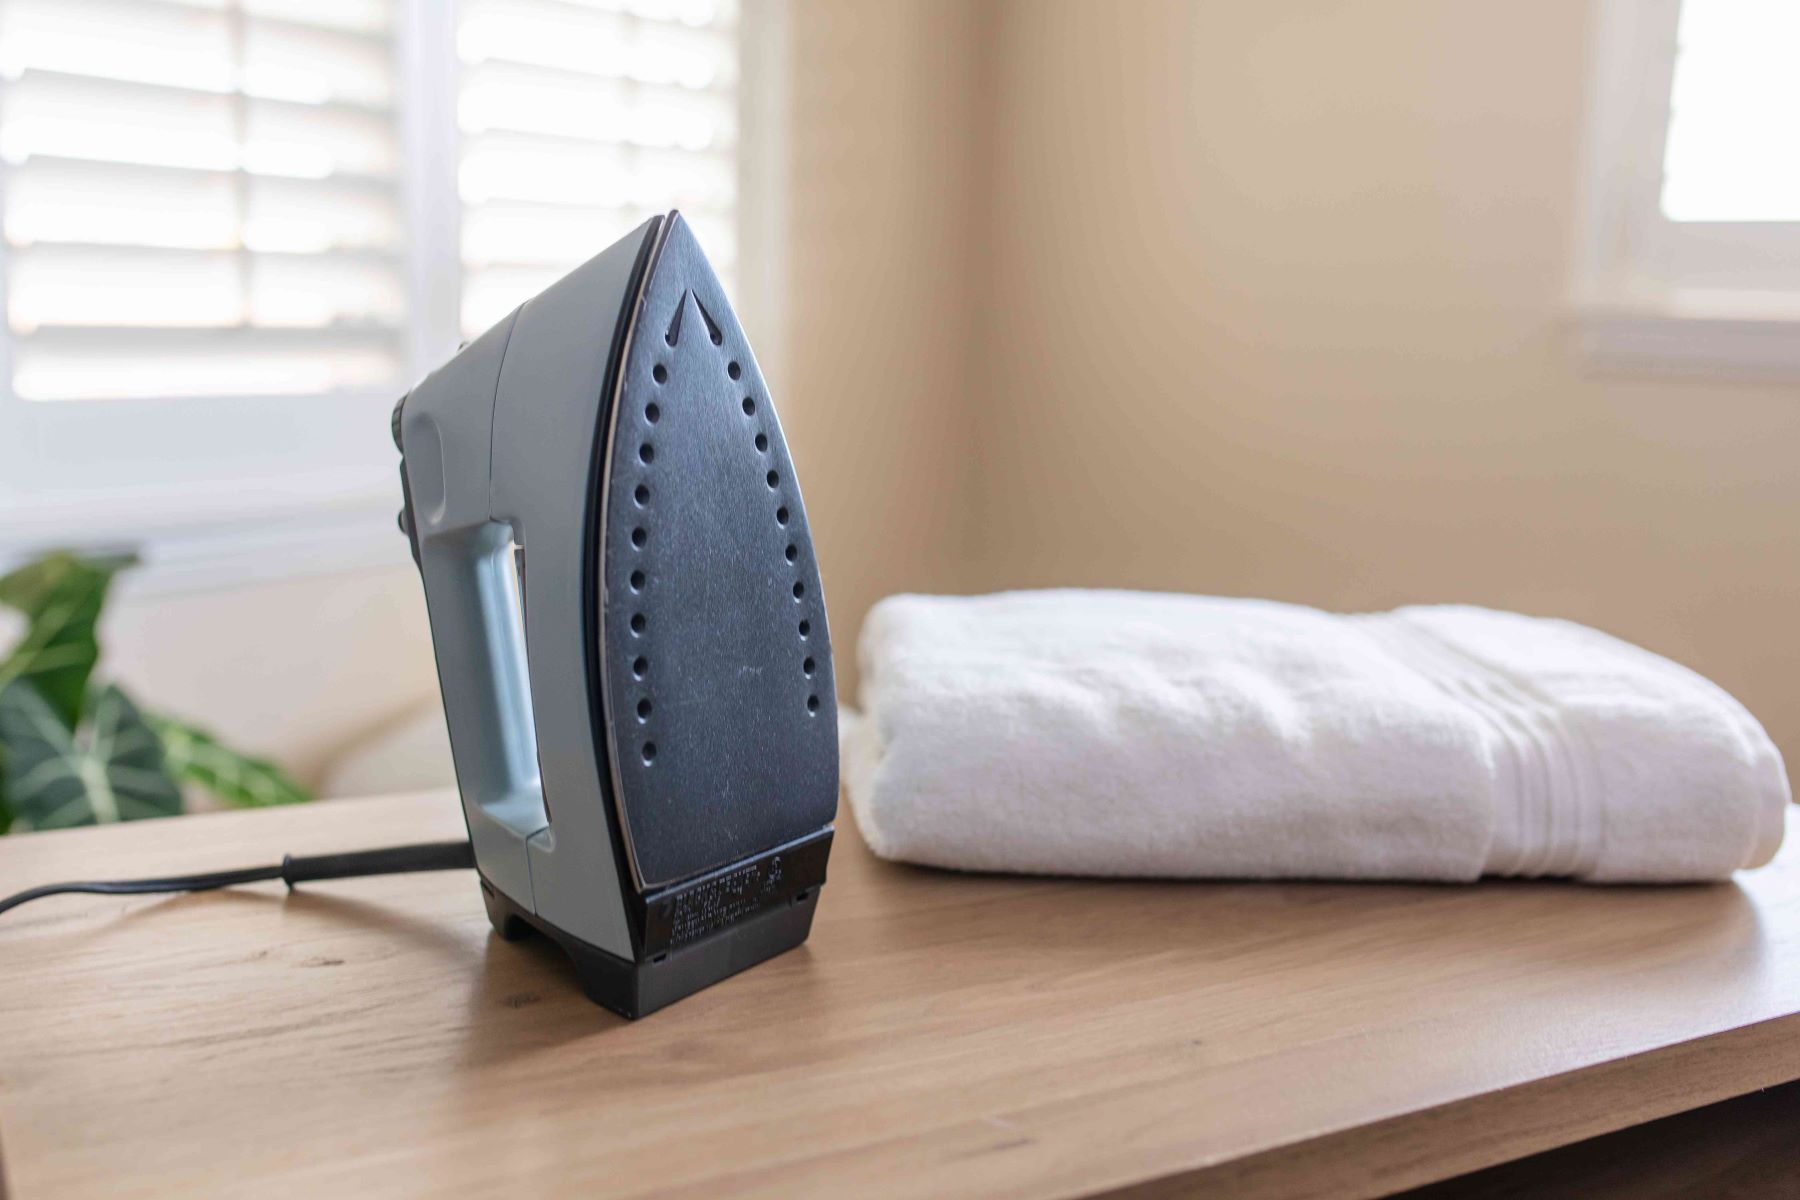 Where To Iron Without An Ironing Board?